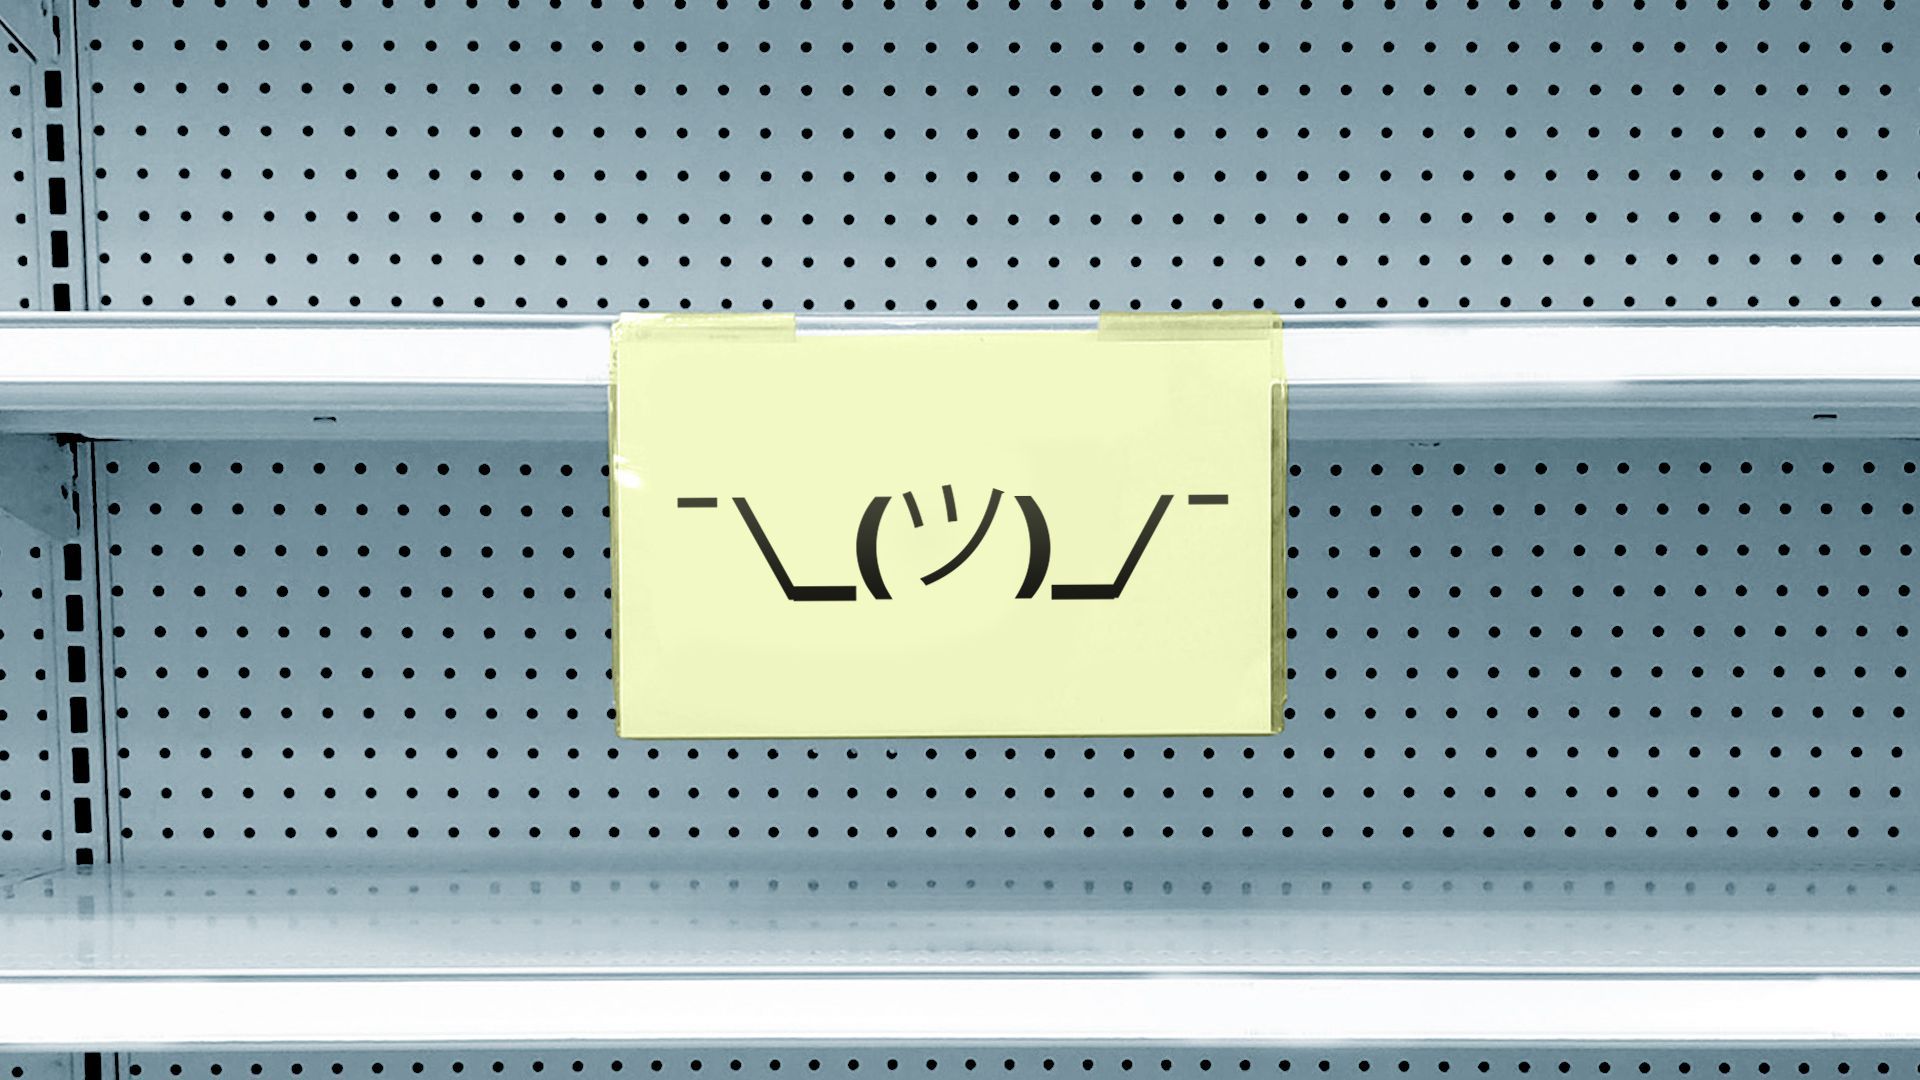 Illustration of empty store shelves, with a sign that has a shrug emoji on it.